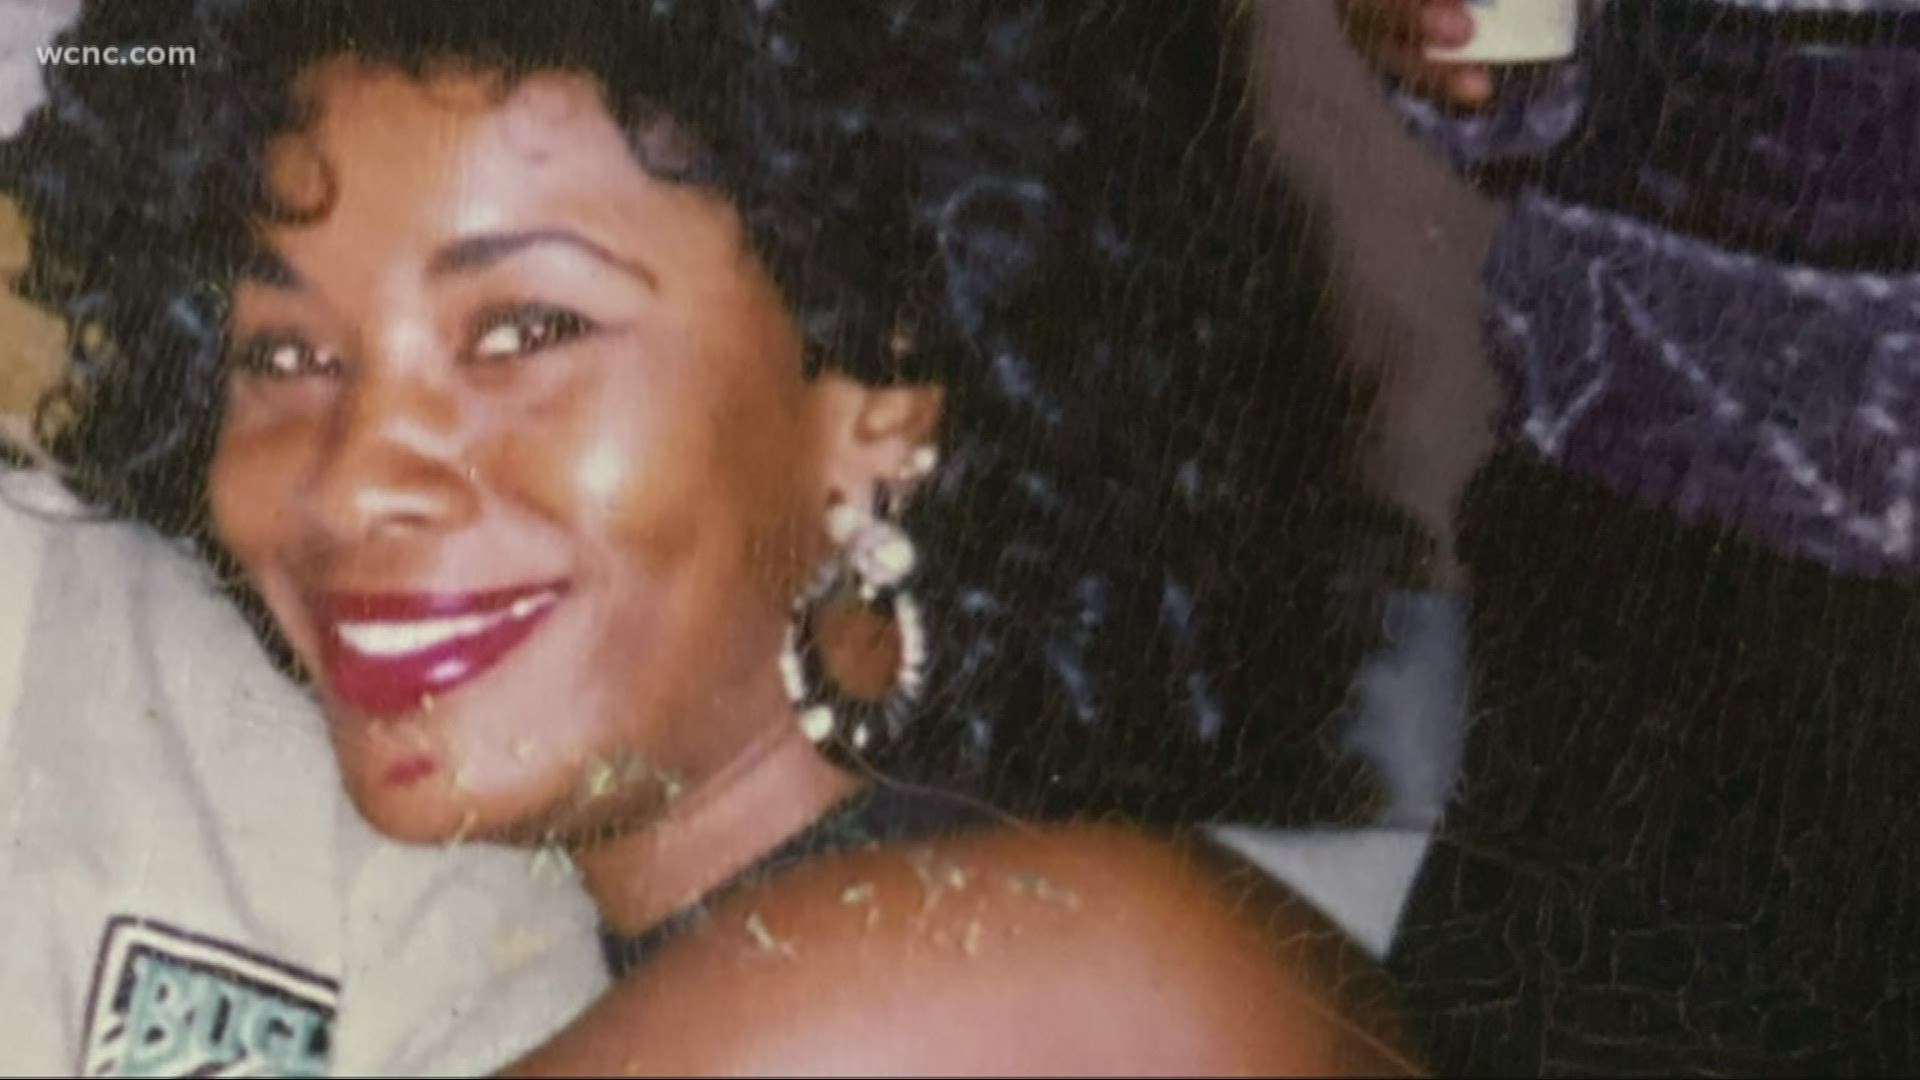 A woman who said she was raped and shot in the head is getting justice decades later, thanks to the Cold Case Unit at the Charlotte-Mecklenburg Police Department.